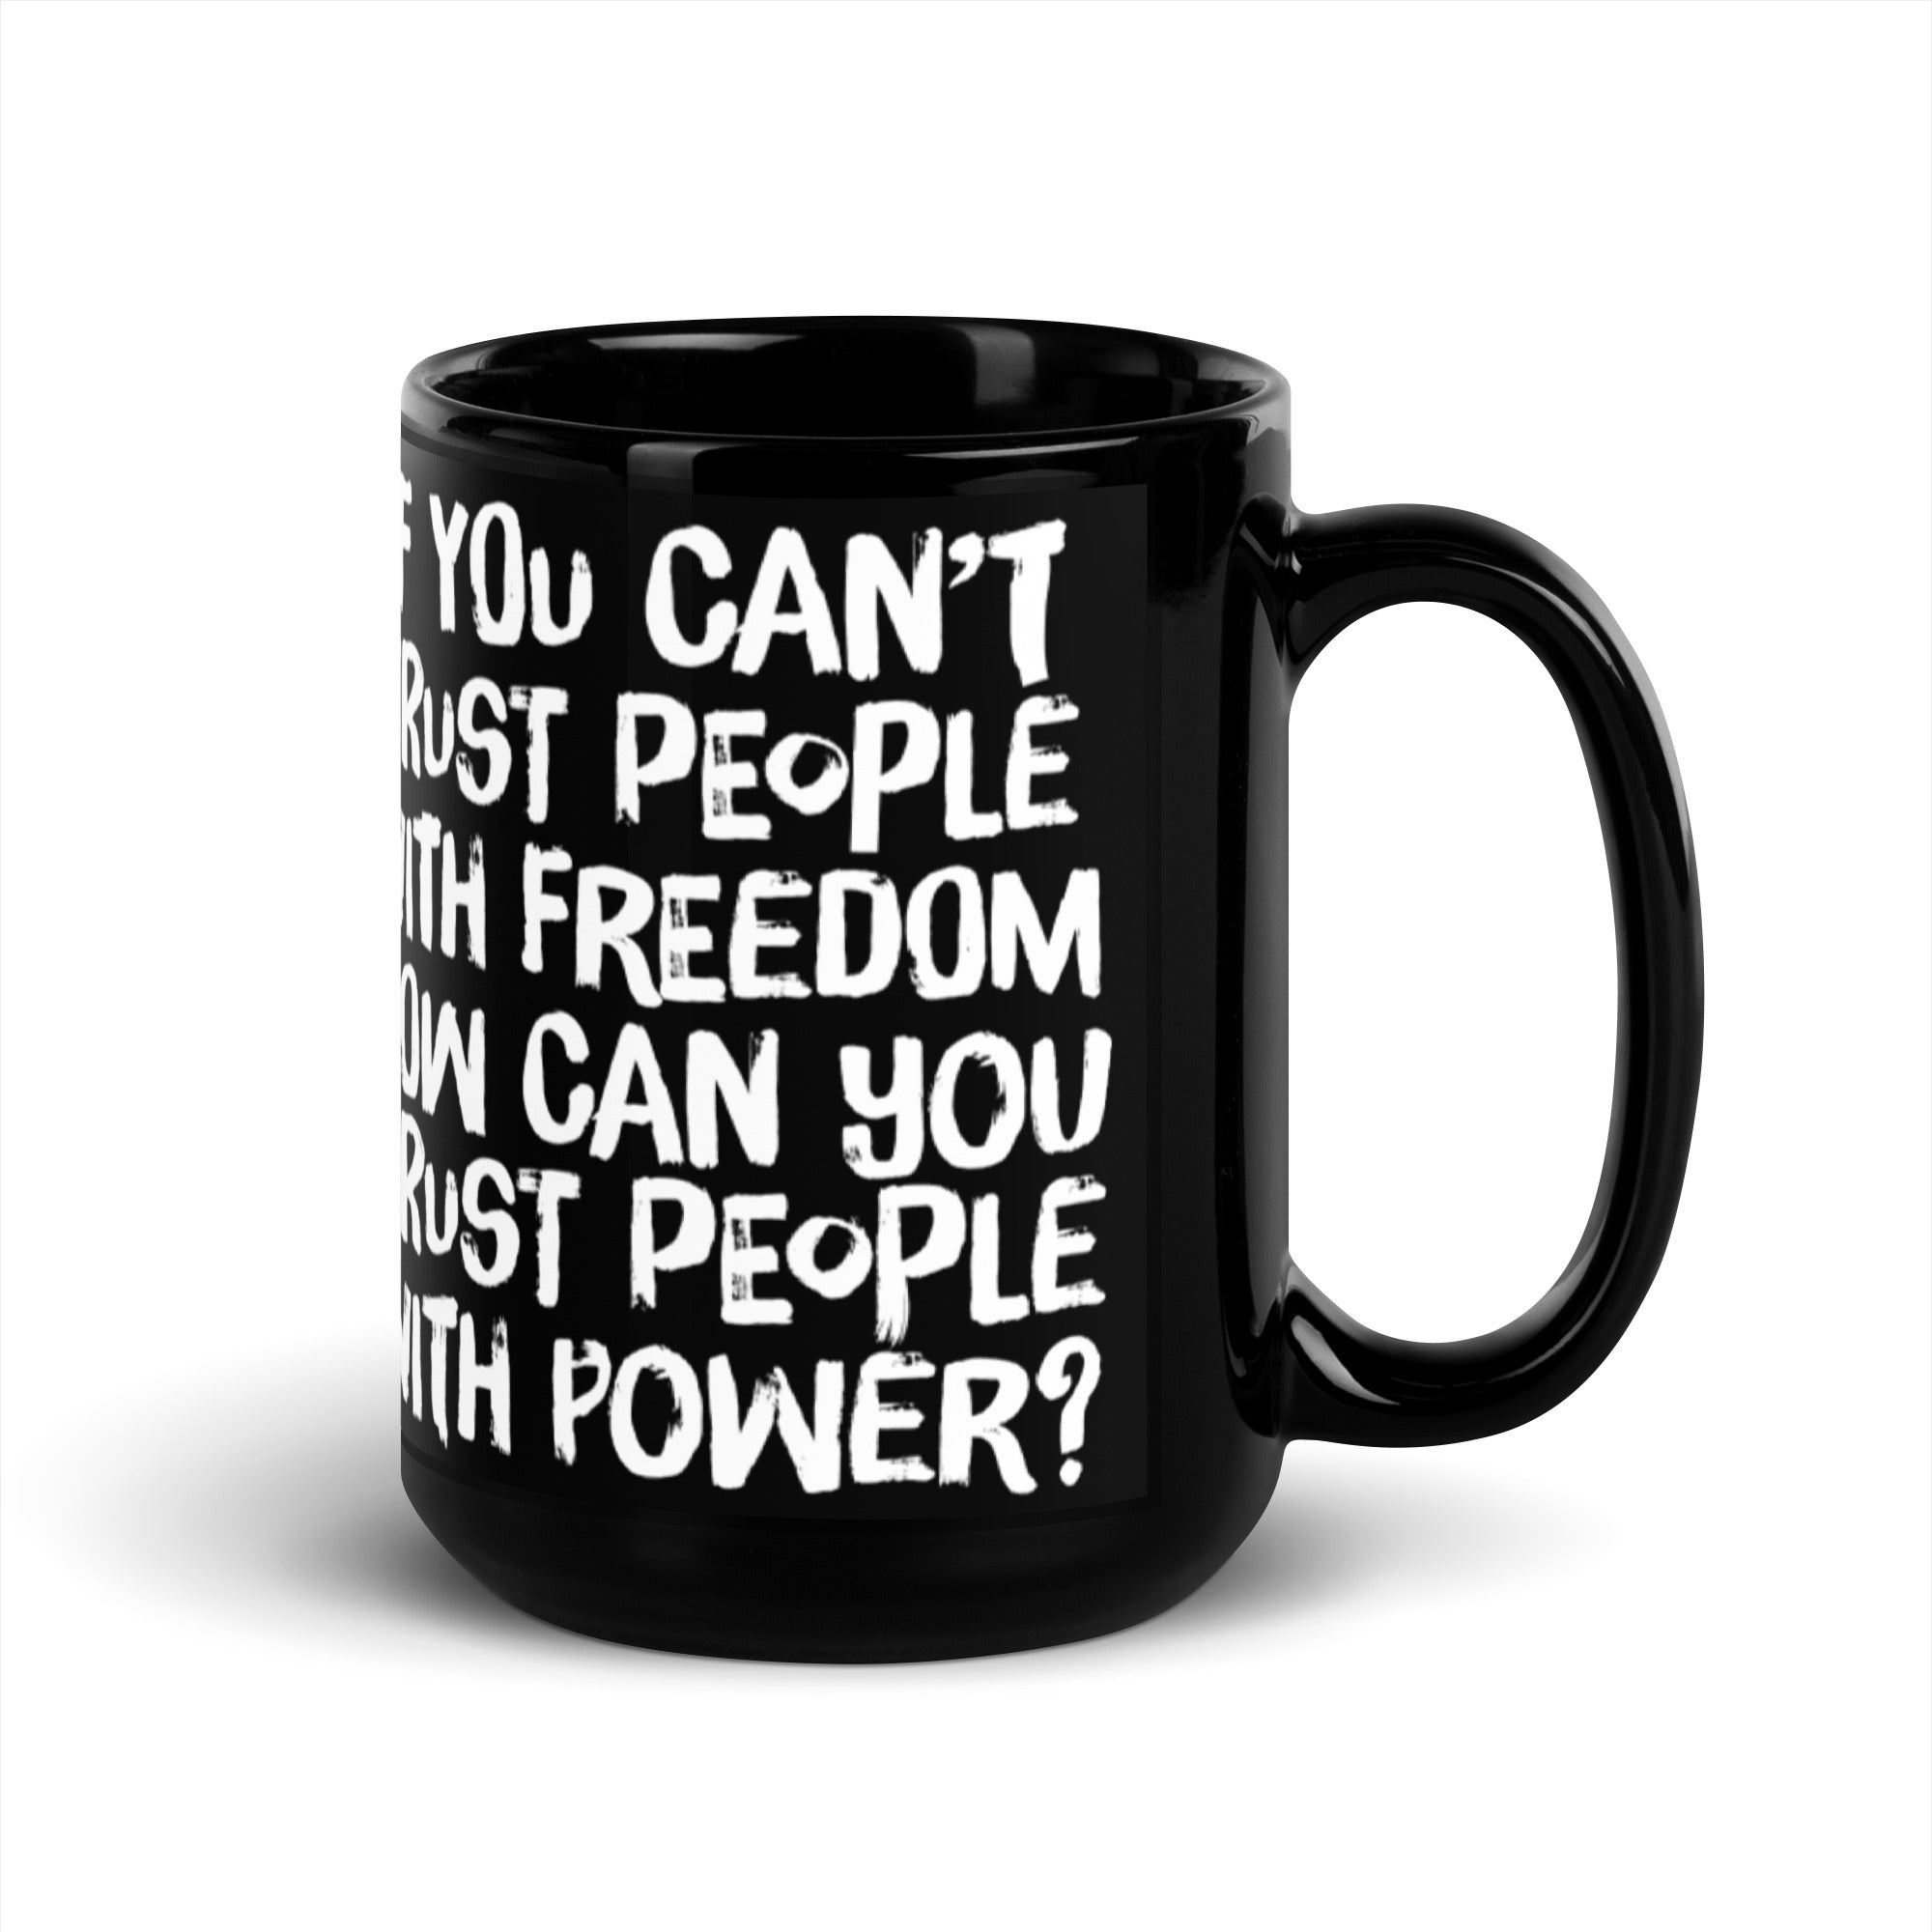 If You Can't Trust People With Freedom How Can You Trust them With Power Mug